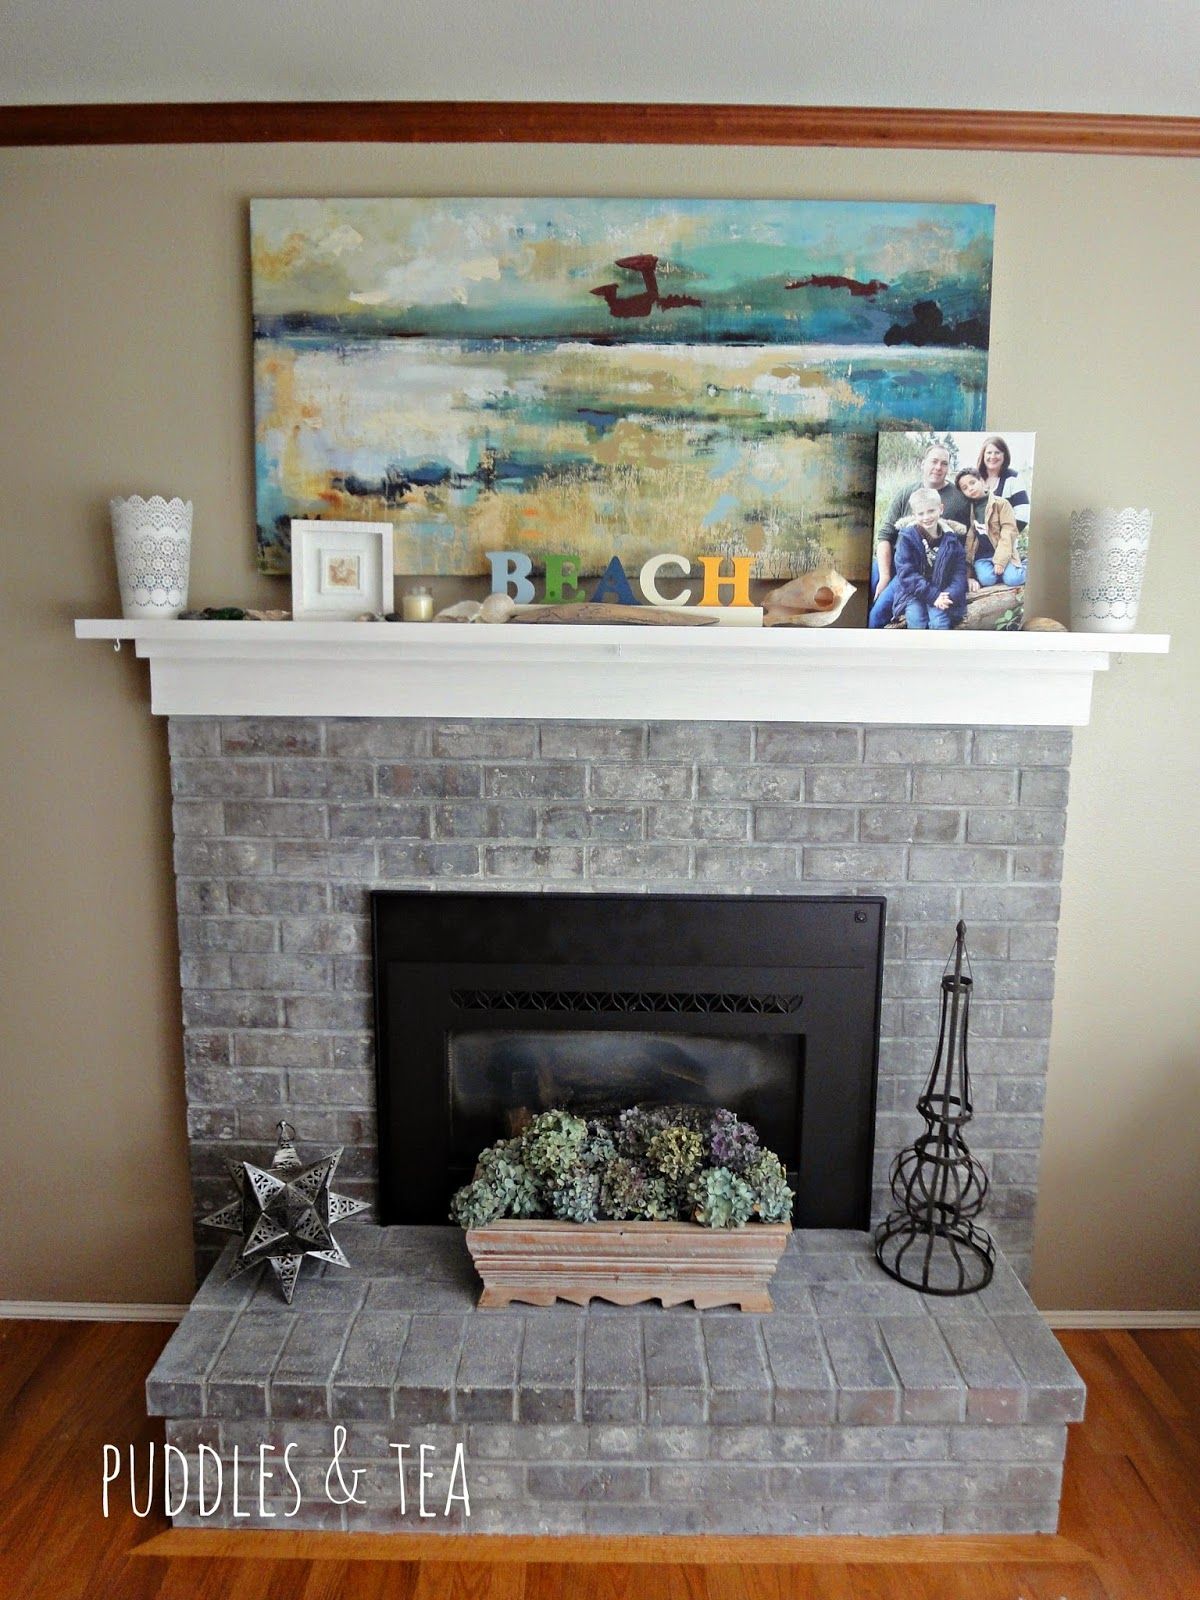 Diy Fireplace Ideas Lovely Puddles & Tea White Wash Brick Fireplace Makeover